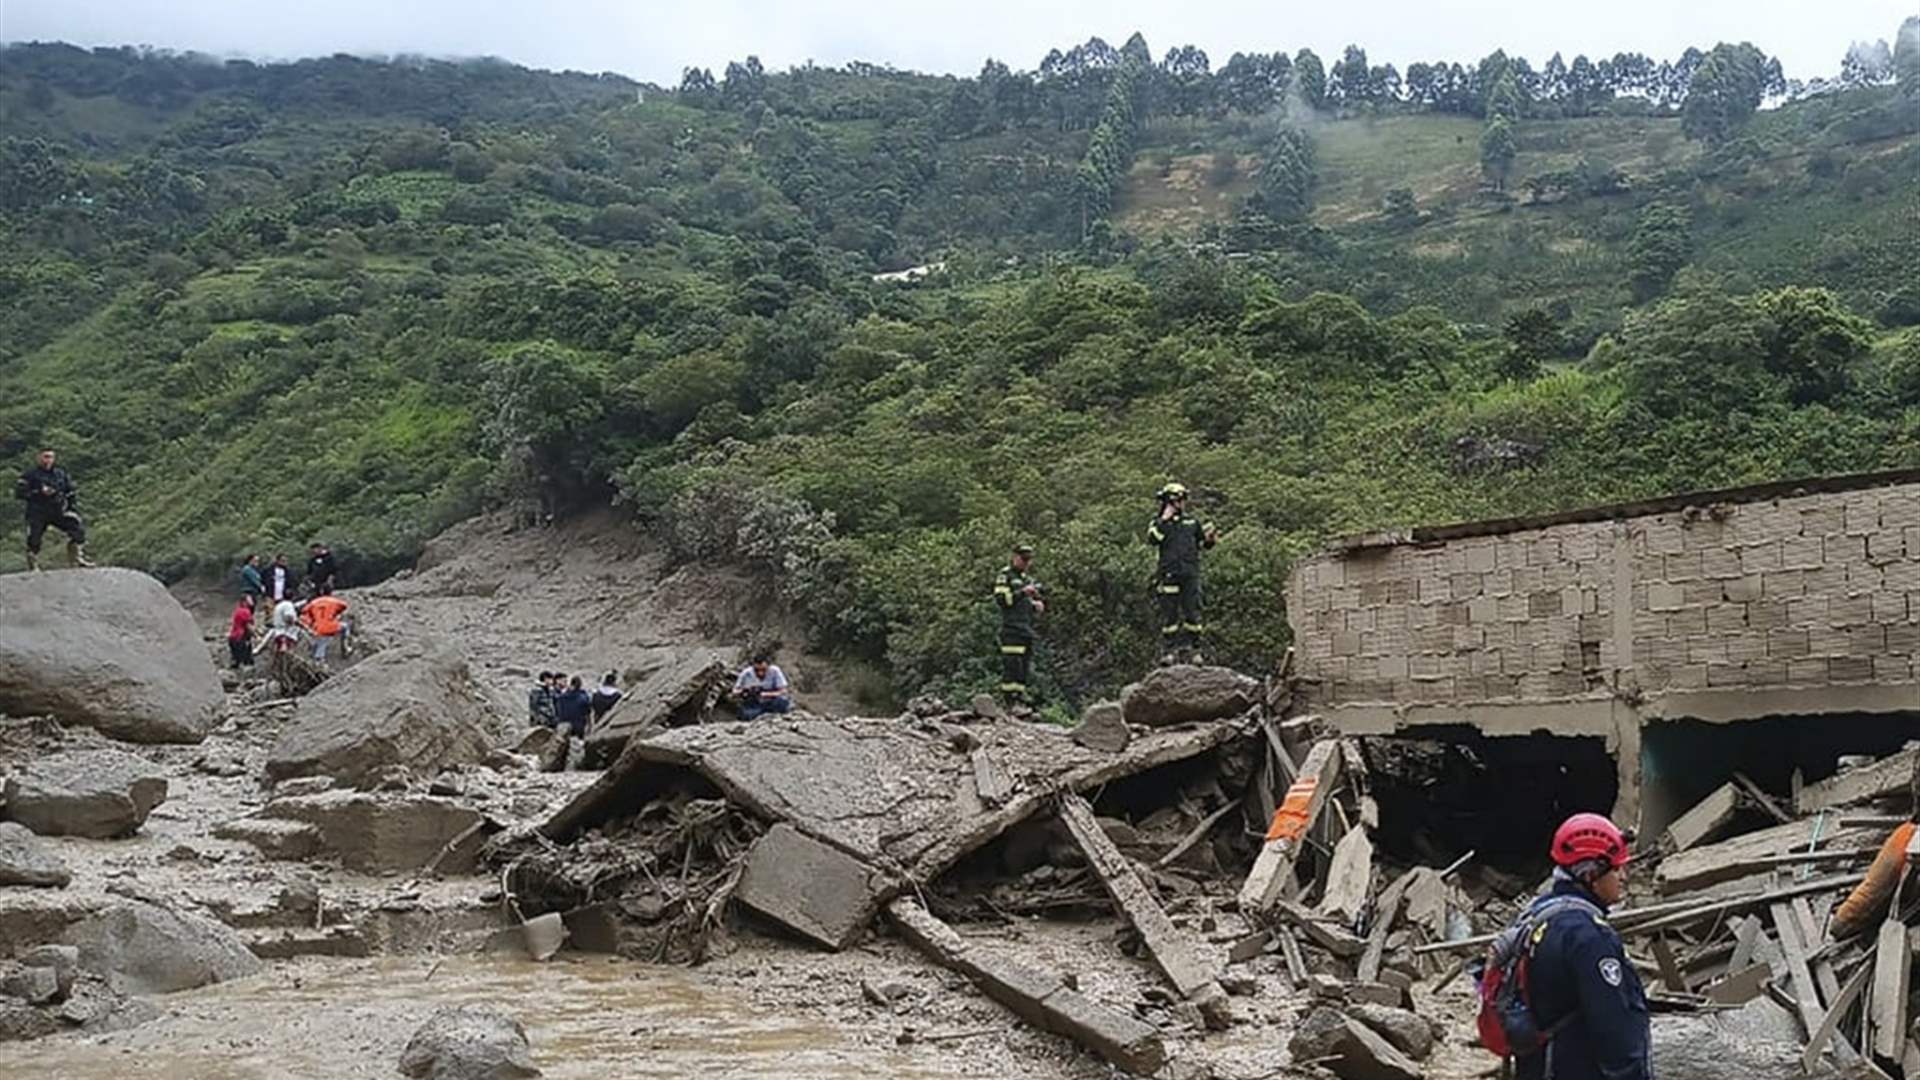 Colombian Authorities Report 20 Dead and 9 Missing After Landslides Amid Heavy Rains